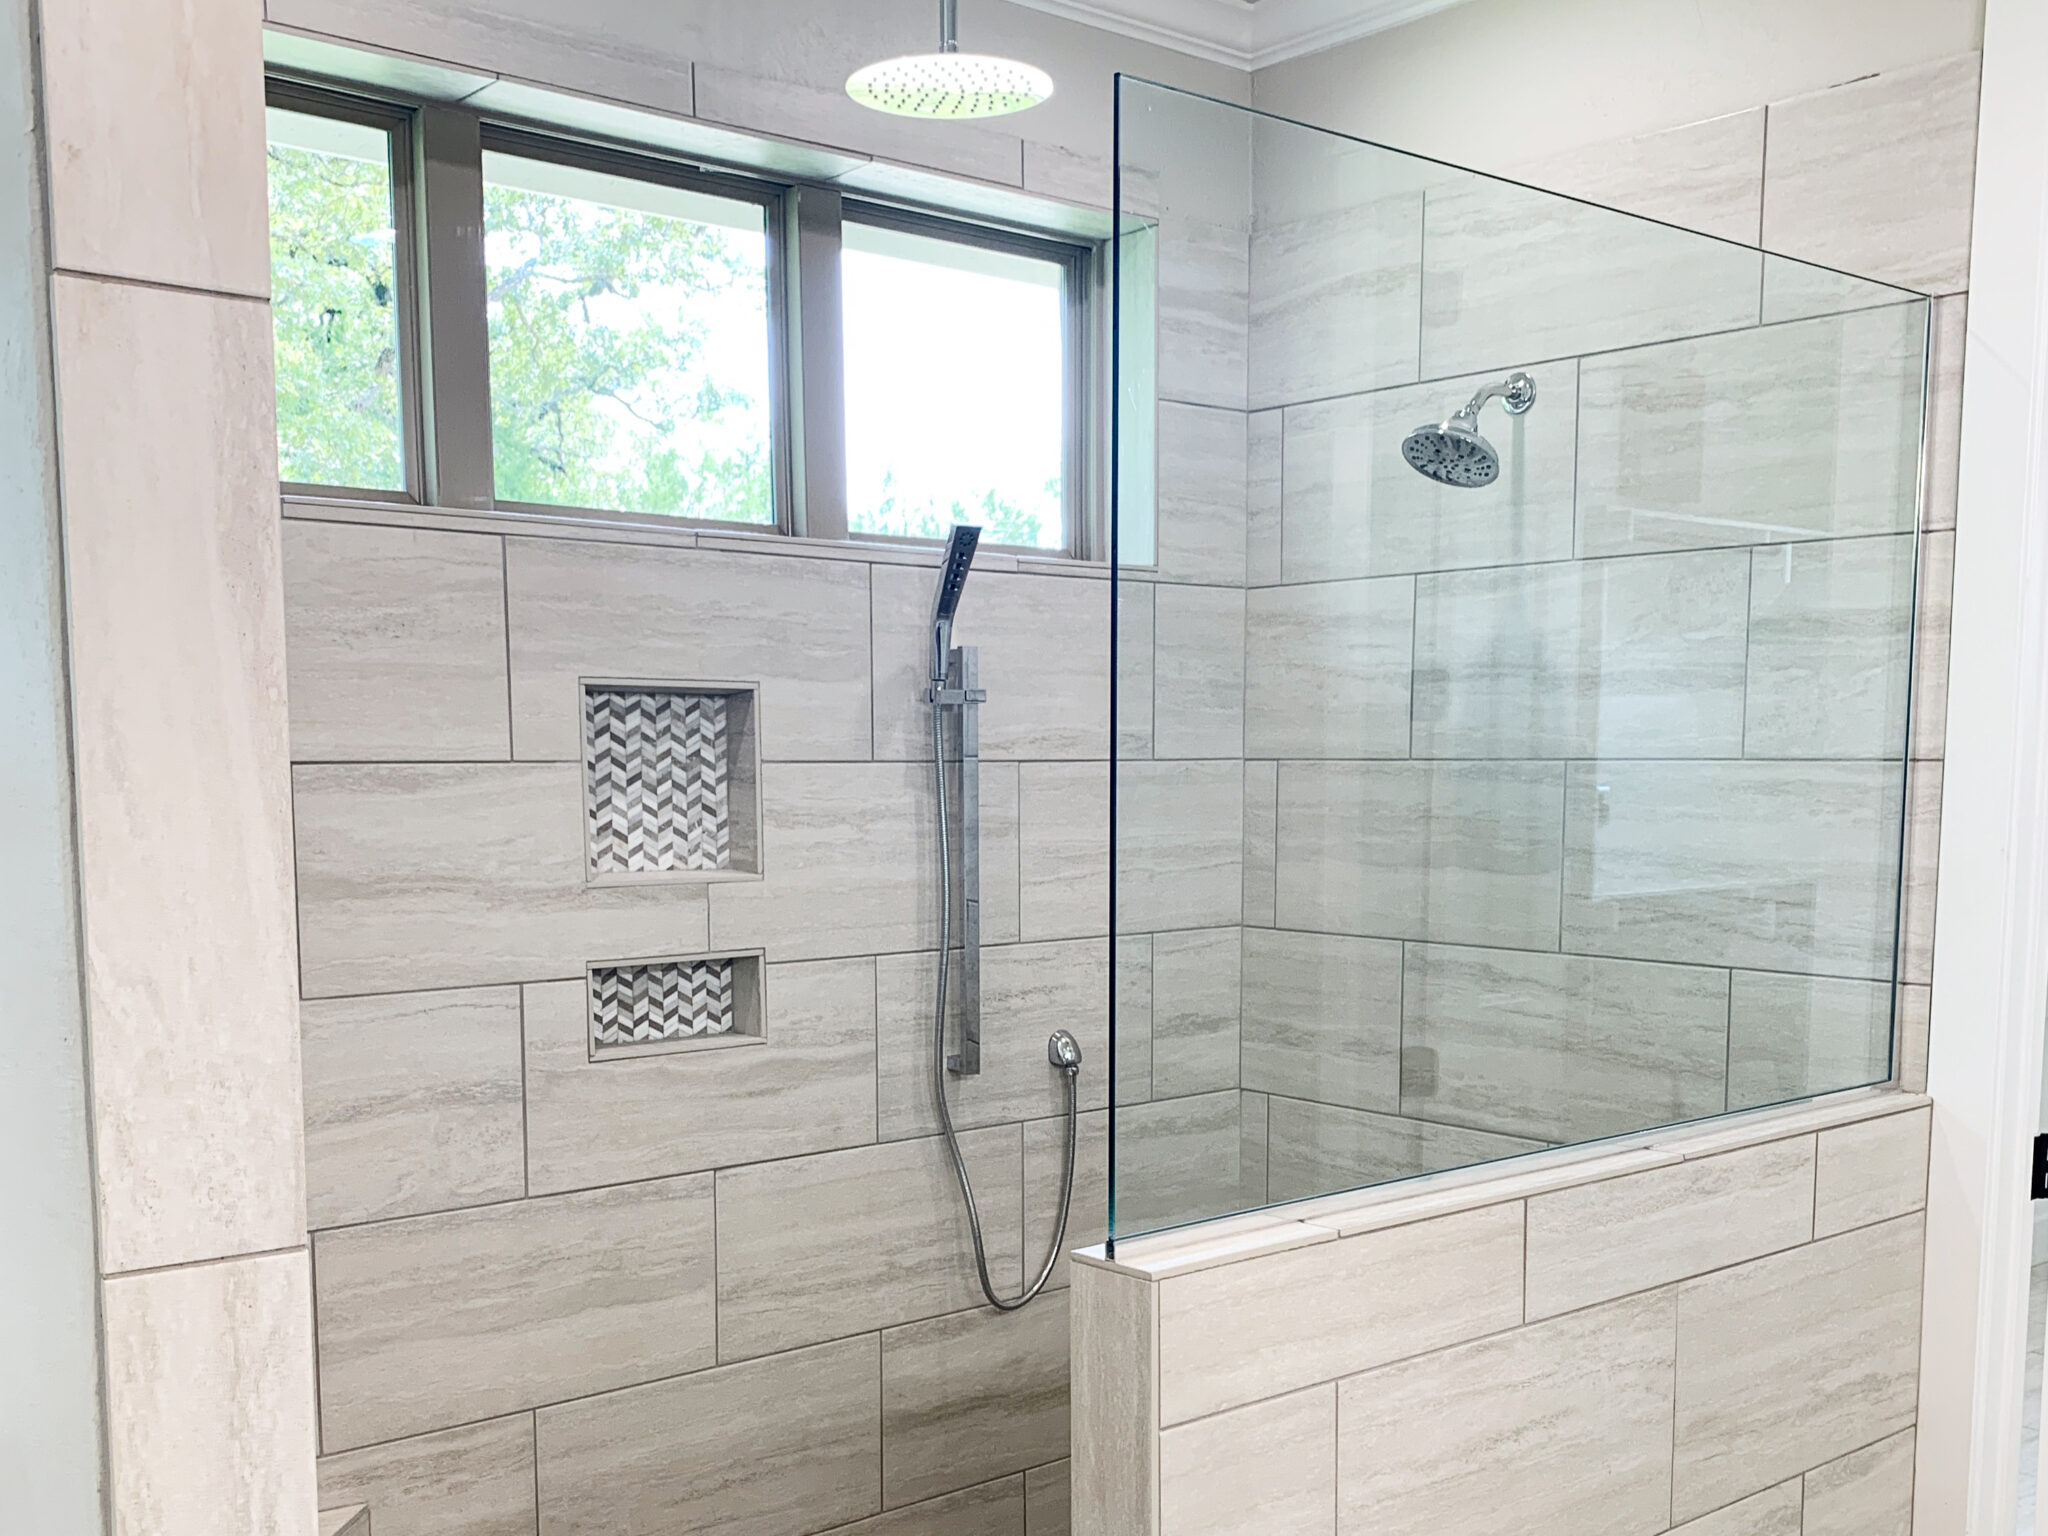 5 Things You Need For A Luxury Shower - Original Farmhouse